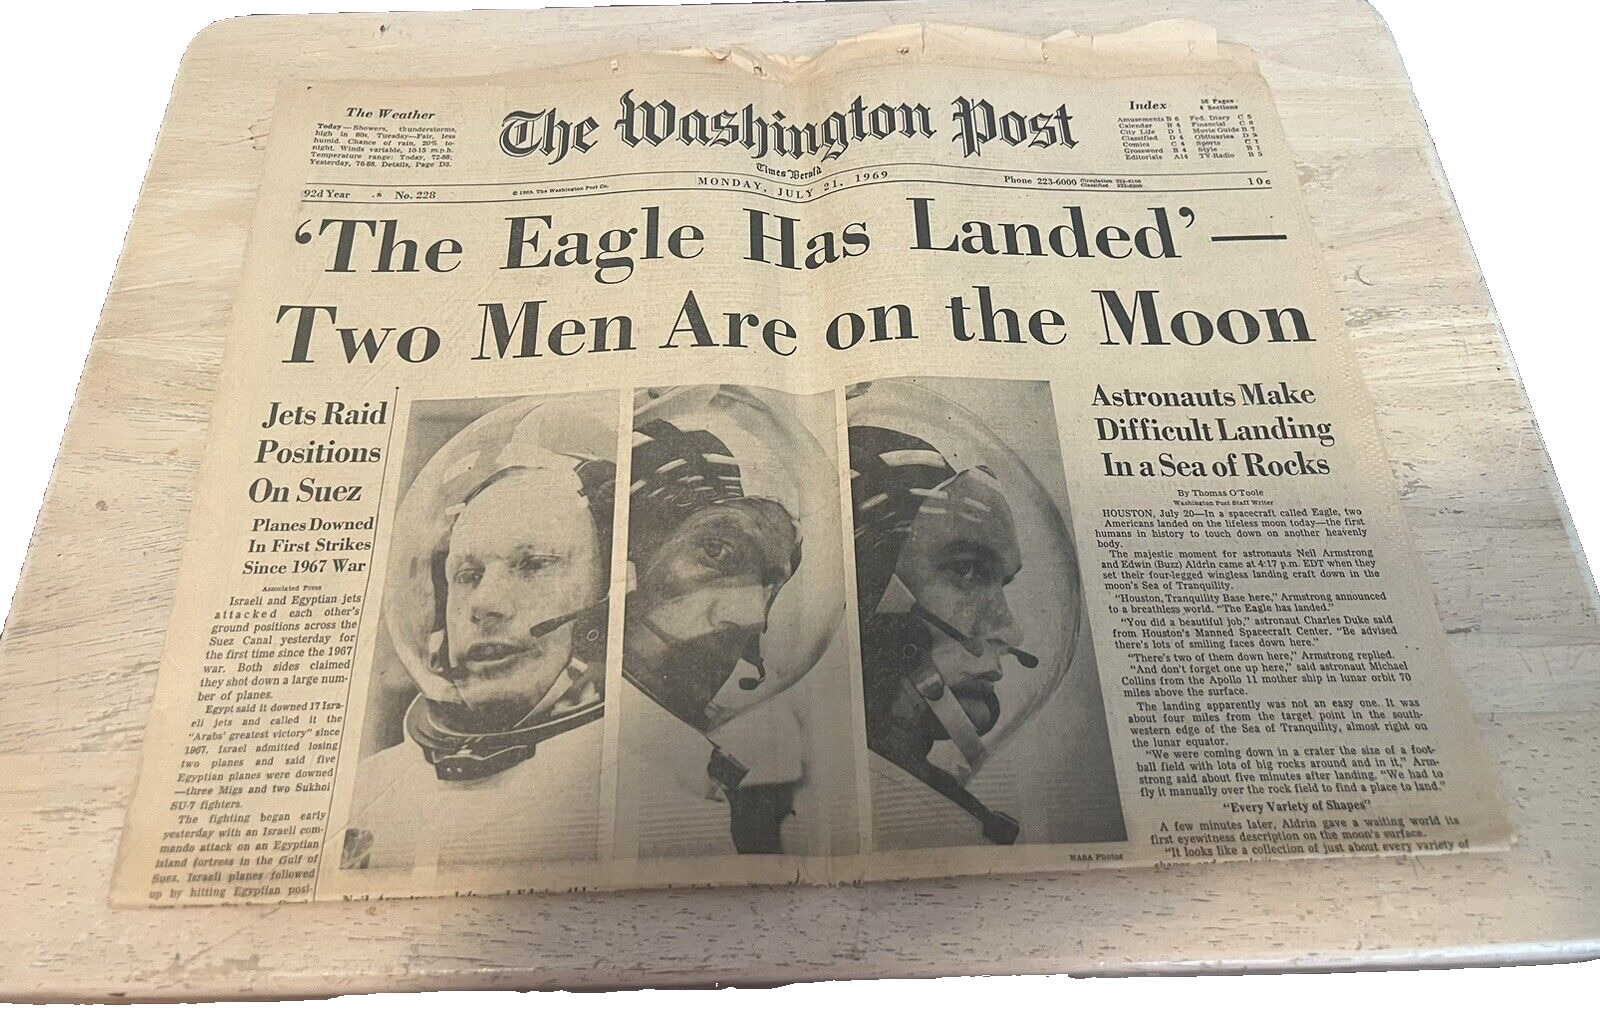 The Washington Post July 21, 1969 The Eagle has landed Newspaper Pages missing